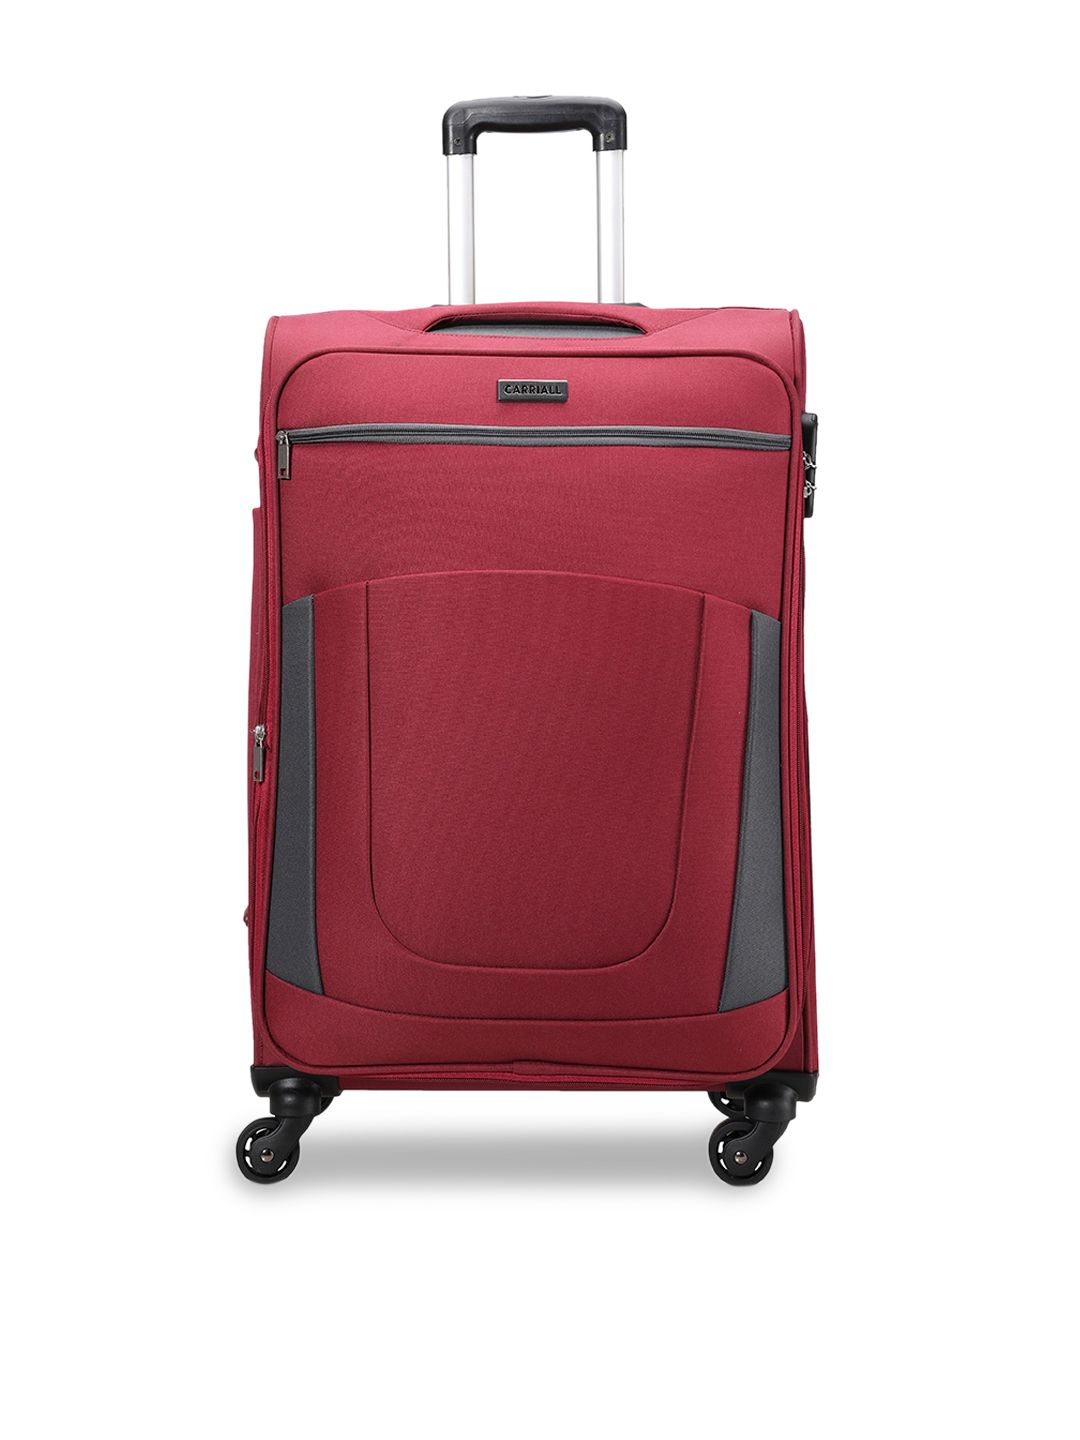 CARRIALL Red & Grey Solid Soft-Sided Medium Trolley Suitcase Price in India